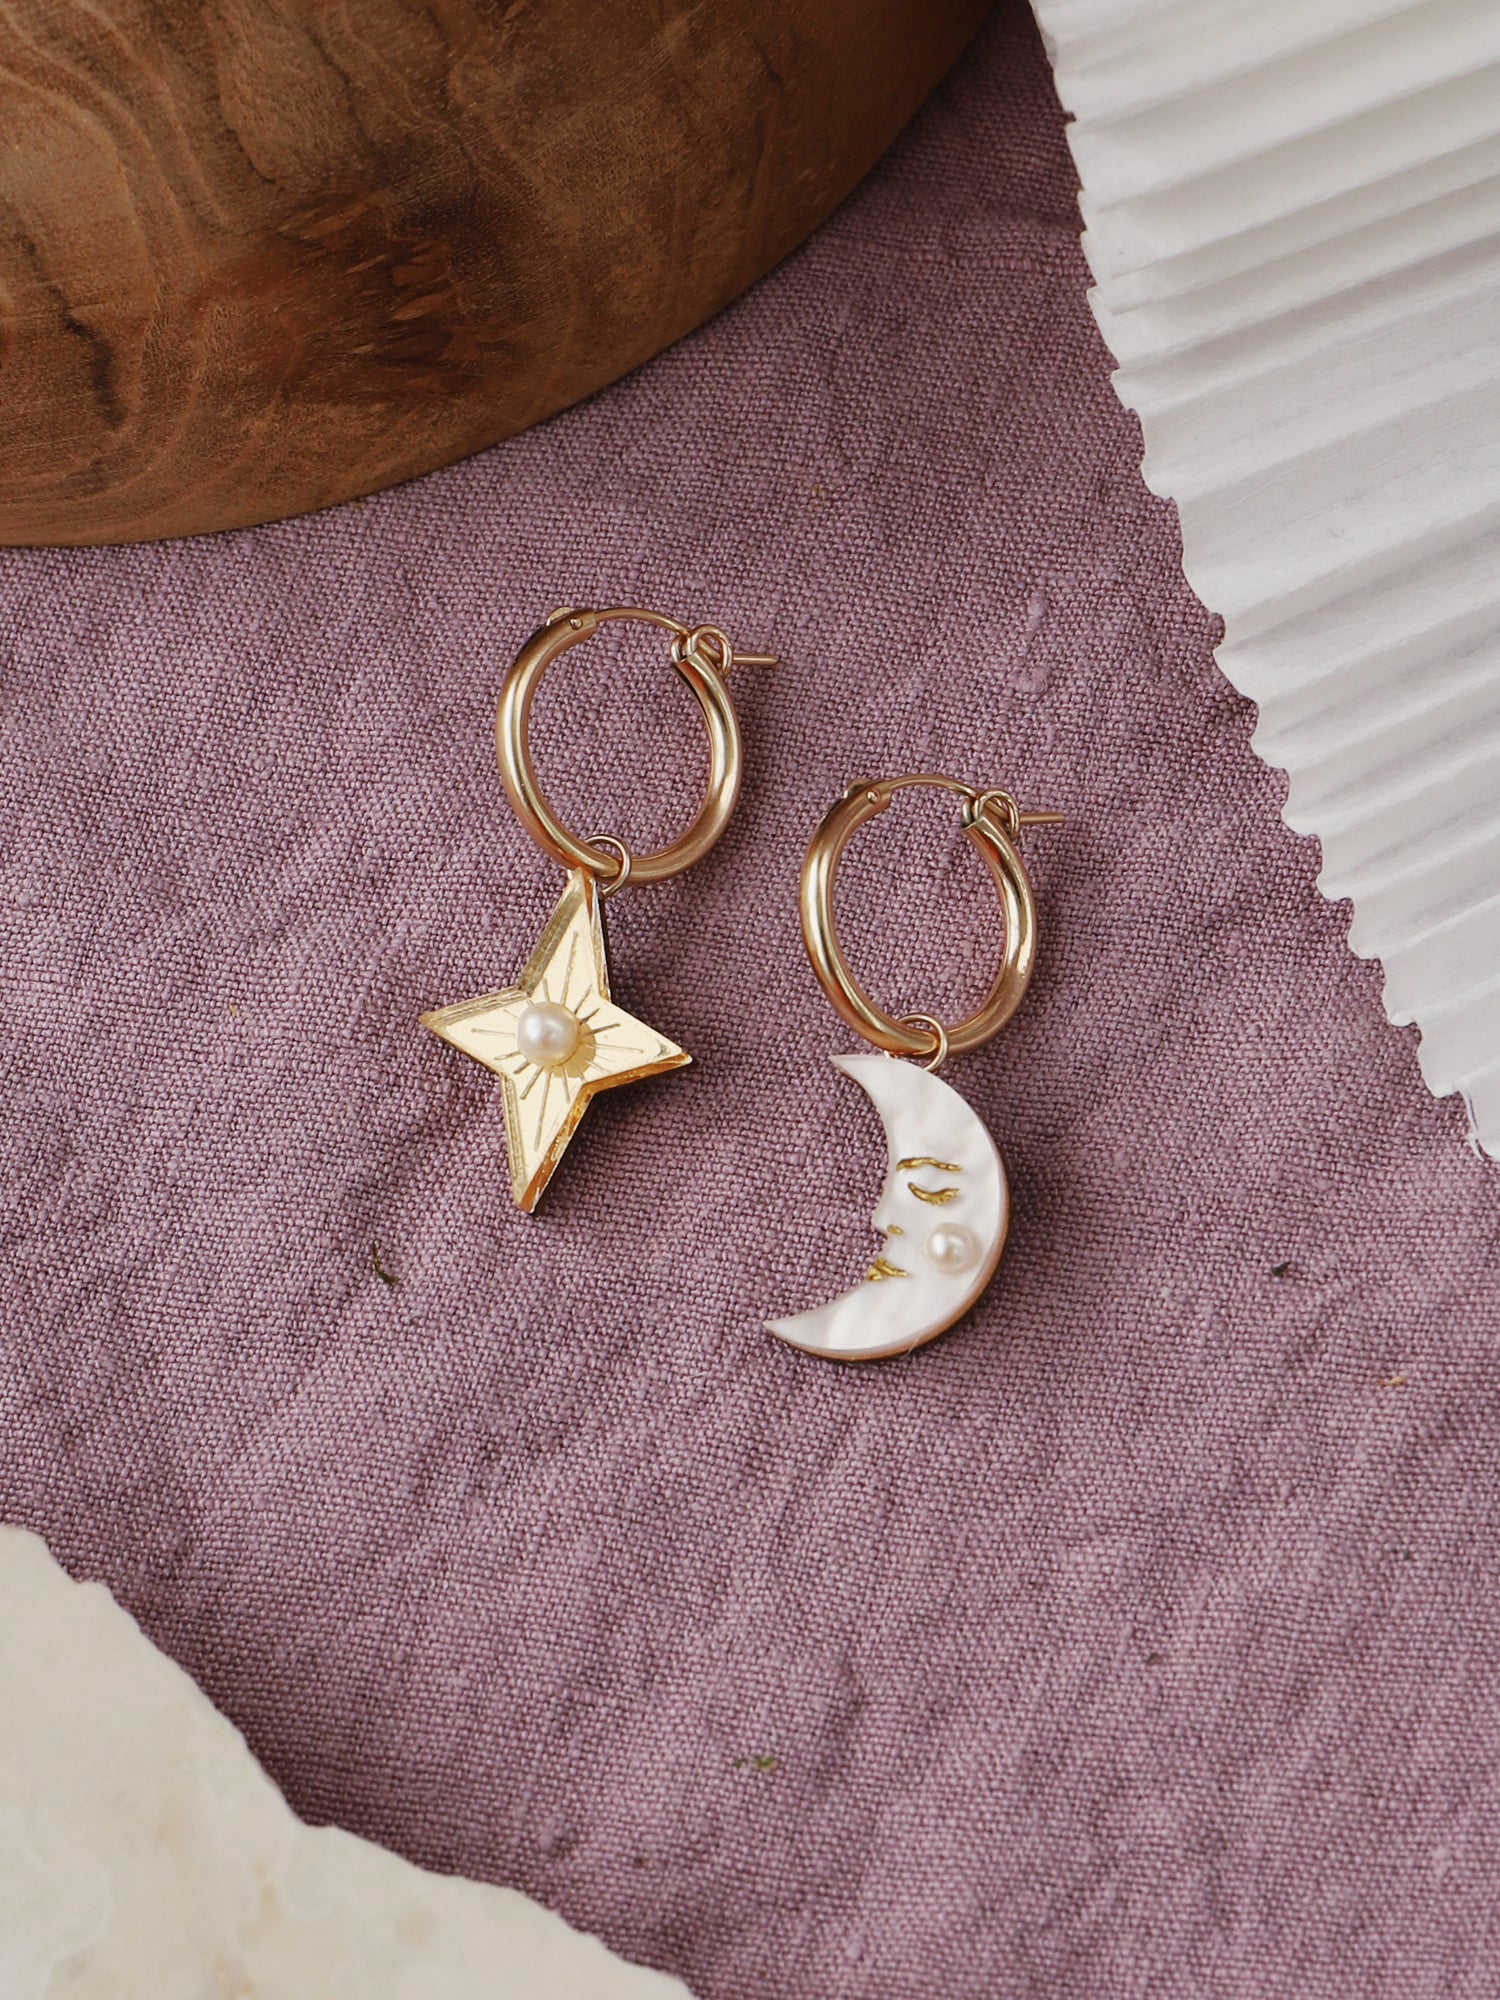 Mix ‘n’ match celestial charm set made with acrylic and glass pearls. This hoop set includes 4 x interchangeable charms. Wear with our 14k gold-filled hoops. This set includes: 1x 'Moon' charm, 1x ‘Star’ charm , 1 x 'Shooting Star' charm, 1 x 'Saturn' charm, 1 x 'Sun' charm & 1 x 'Cloud' charm. Handmade in London by Wolf & Moon.